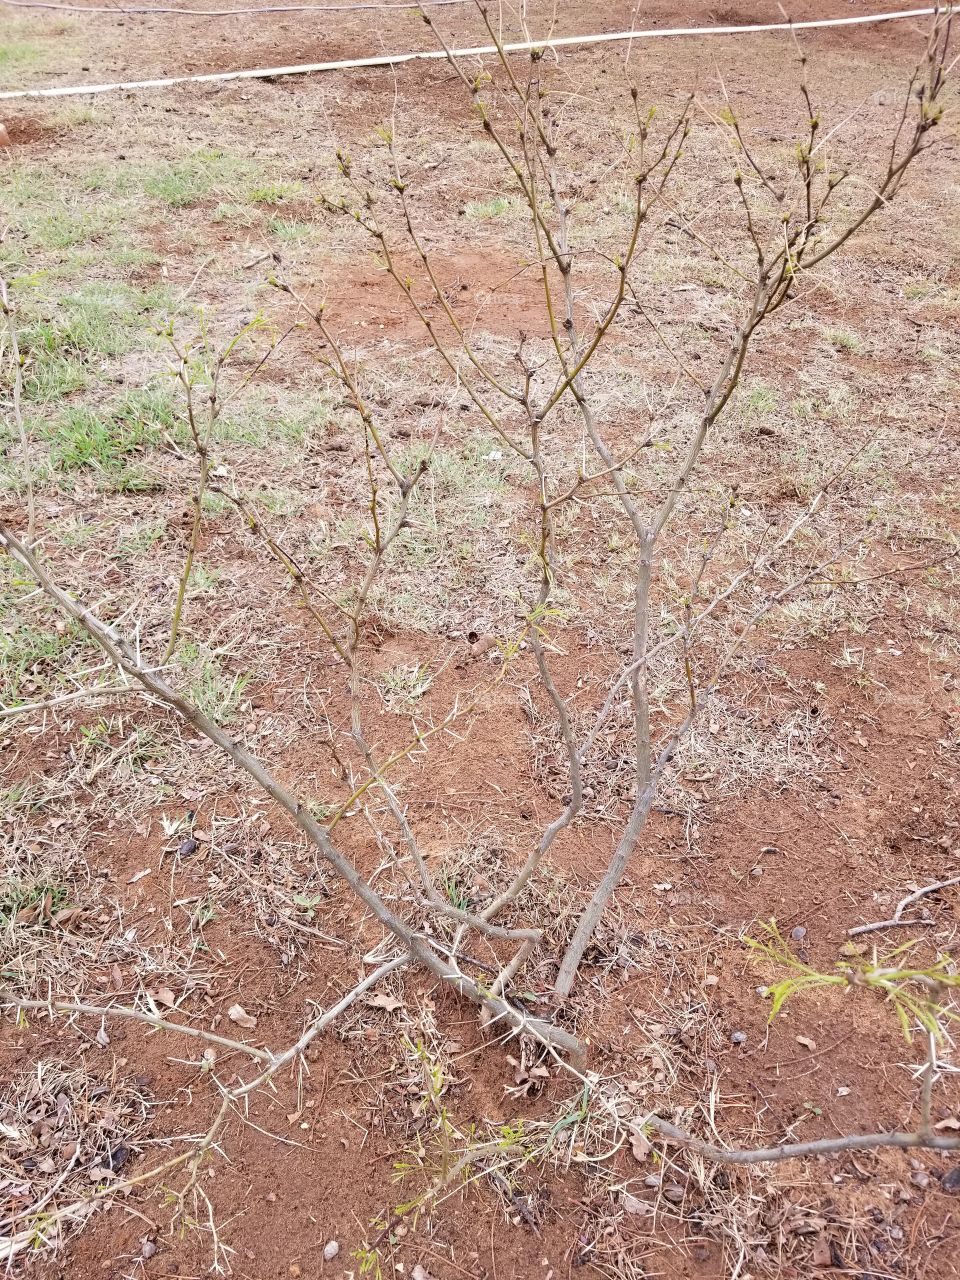 a young mesquite tree